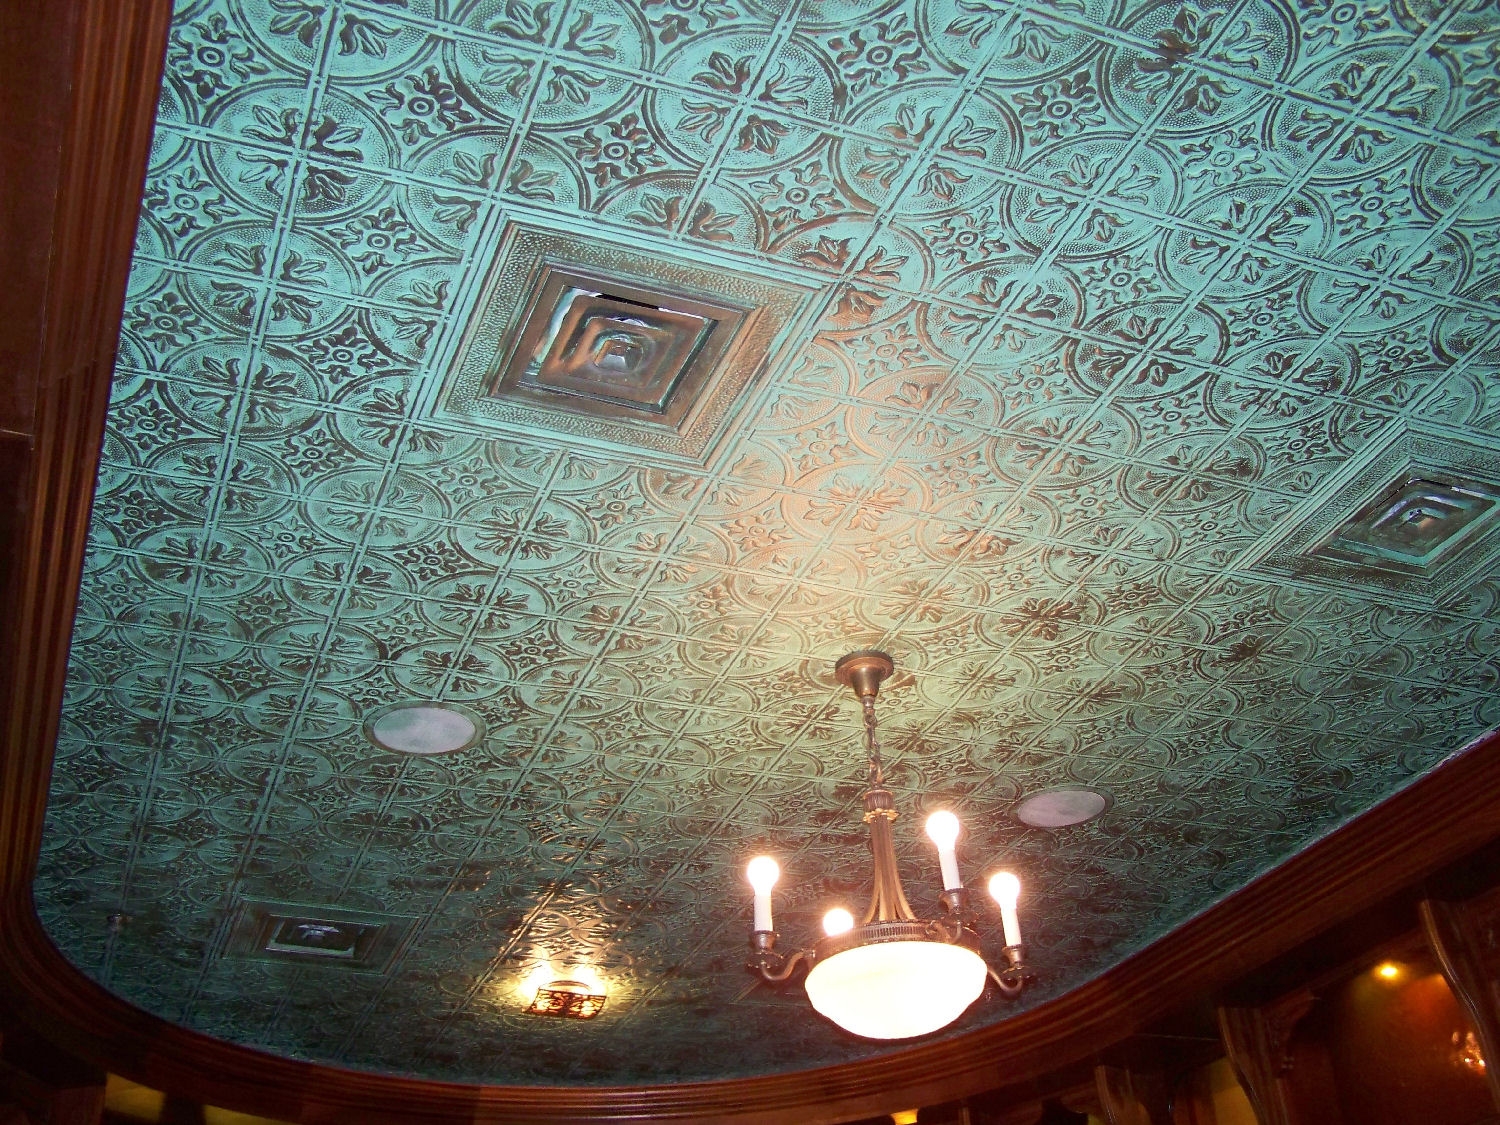 Punched Tin Ceiling Tiles Punched Tin Ceiling Tiles easy install tin ceiling tiles save money 1500 X 1125